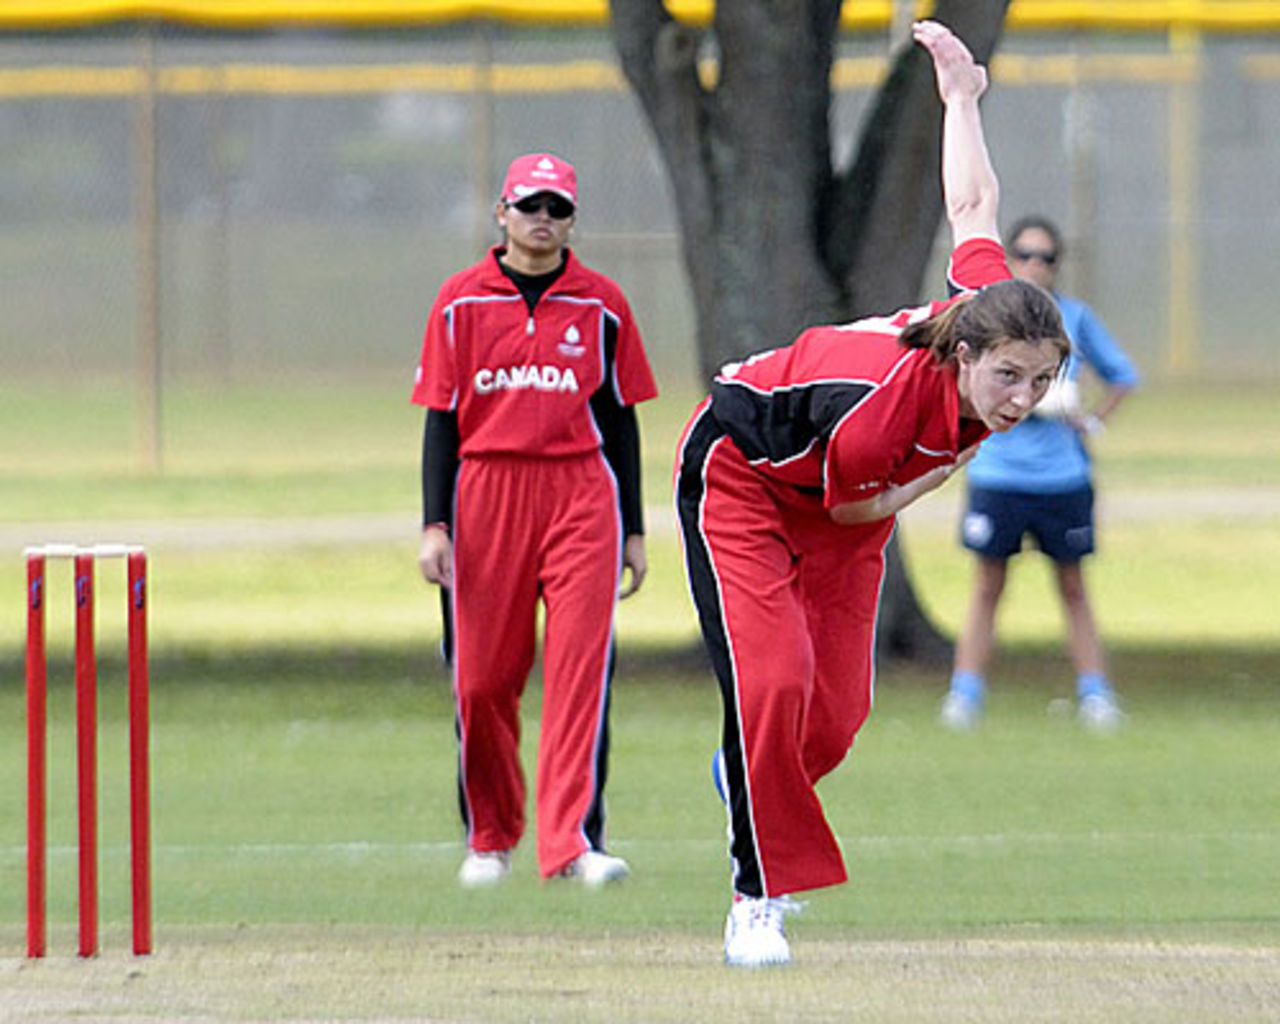 Meara Crawford took four wickets in the tournament, ICC Americas women's championship, Florida, May 22, 2009